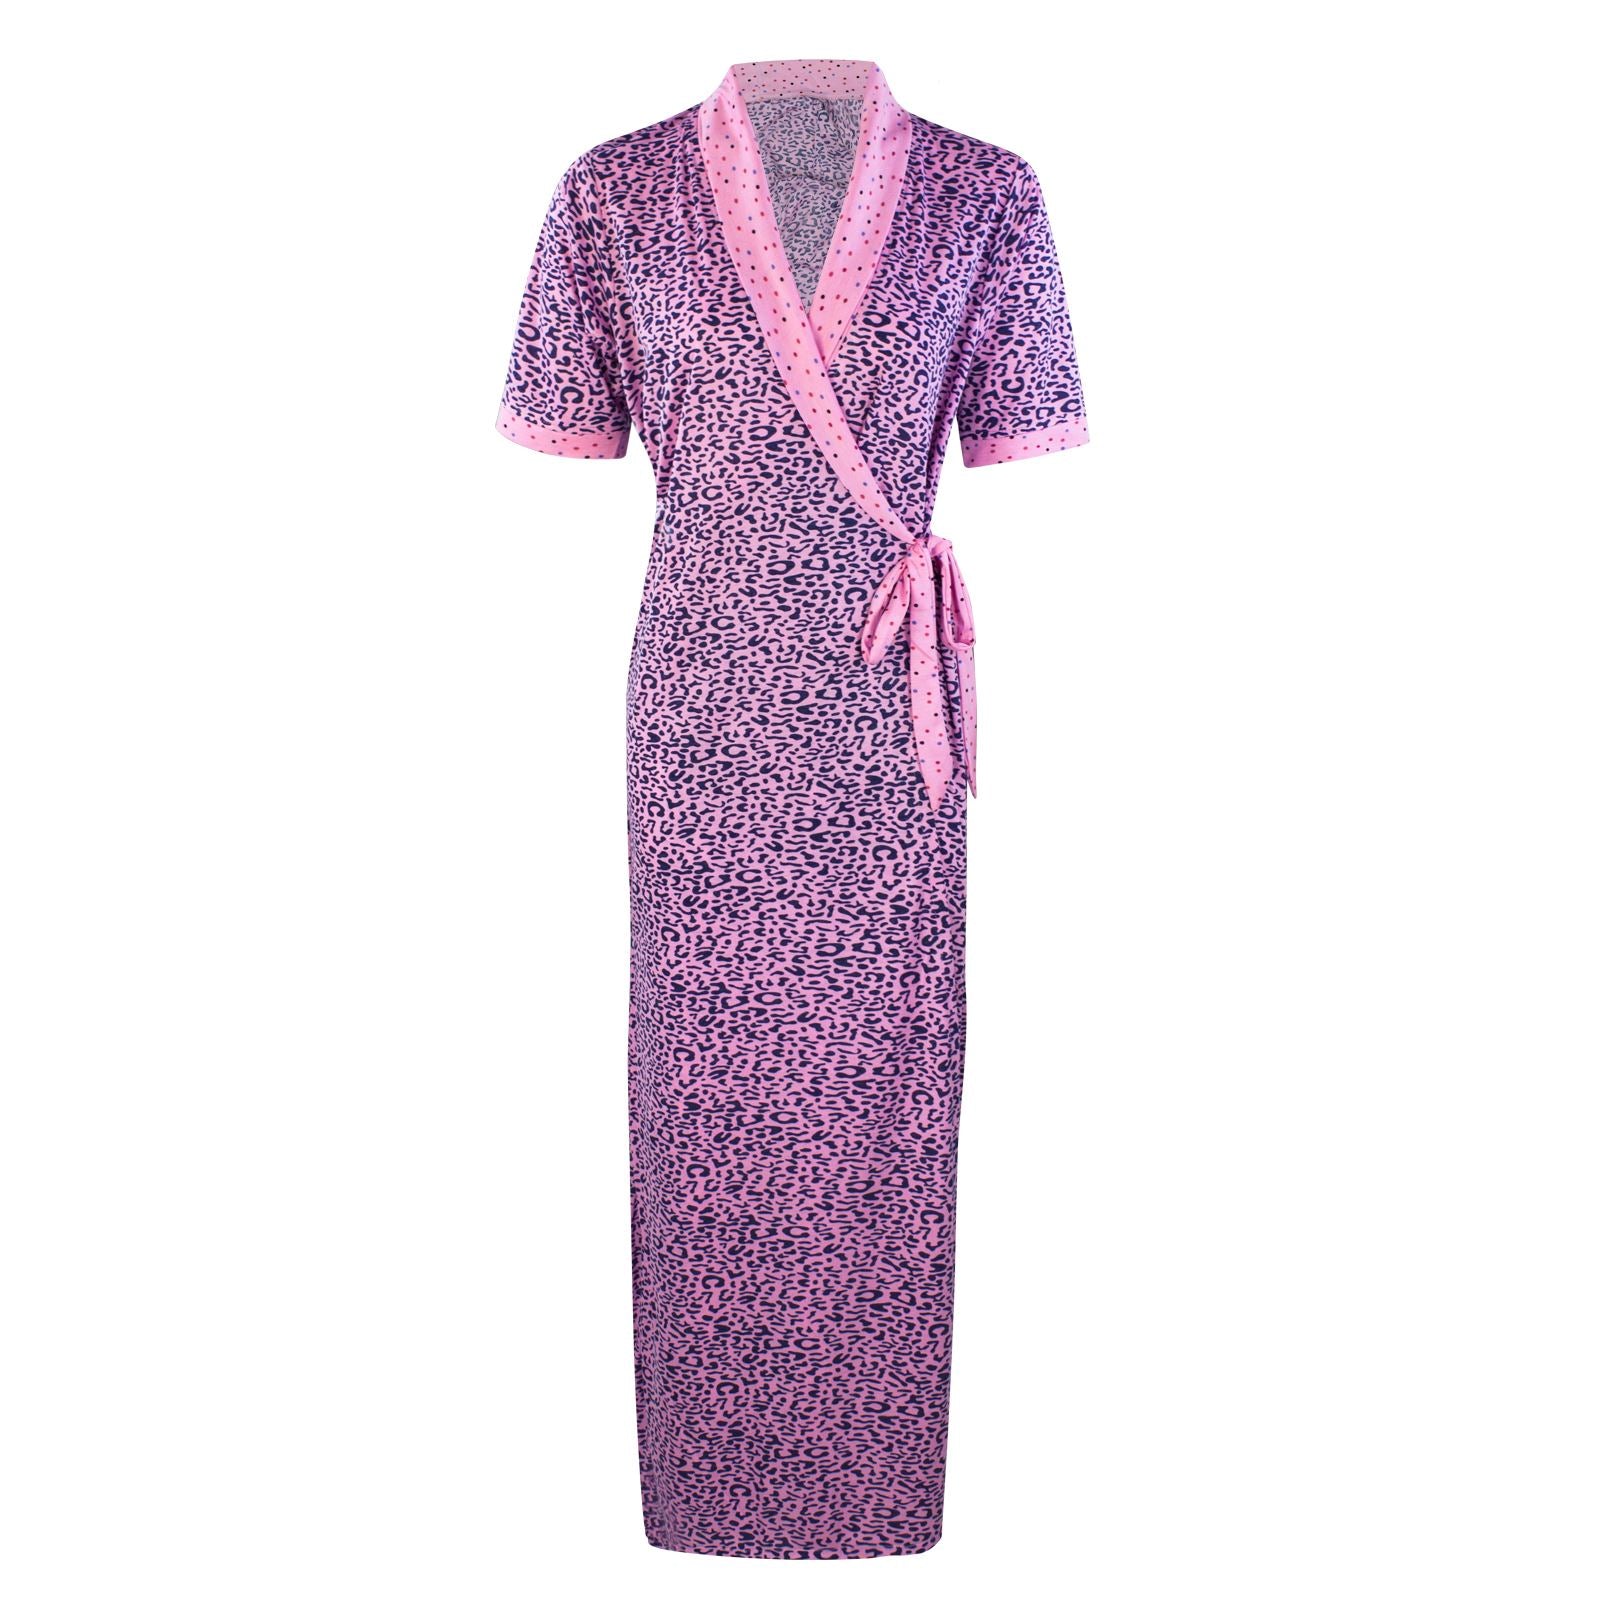 Pink / One Size Animal Print Cotton Robe / Wrap Gown The Orange Tags